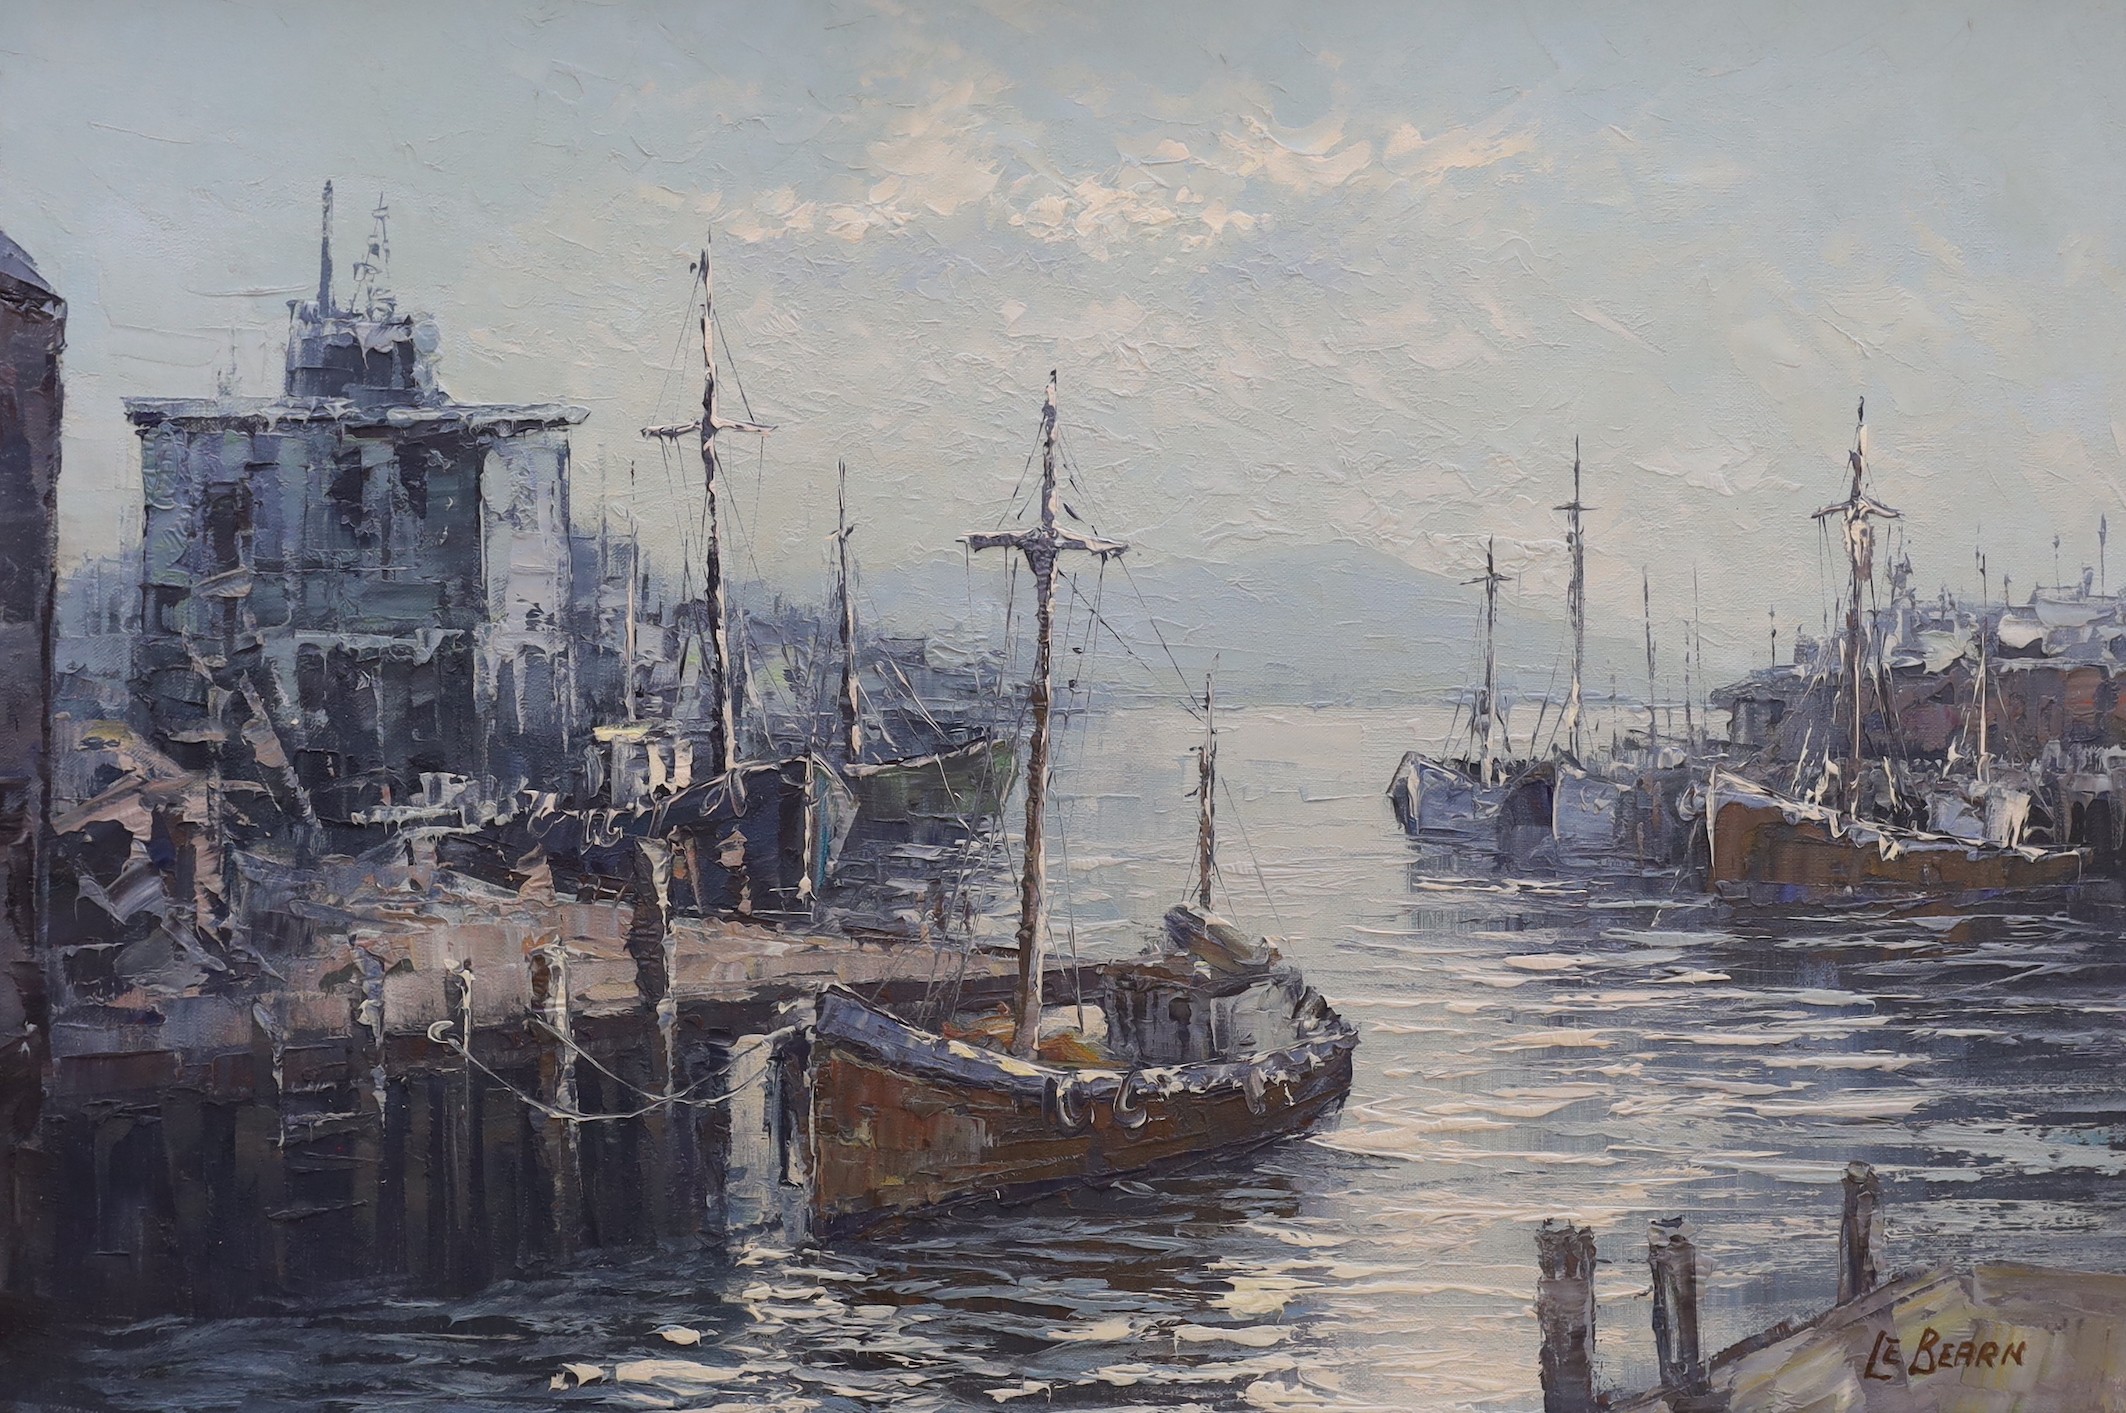 L.E. Bearn, oil on canvas, Fishing boats in harbour, 50 x 75cm and an oil of sailing ships by Alexis, 50 x 60cm